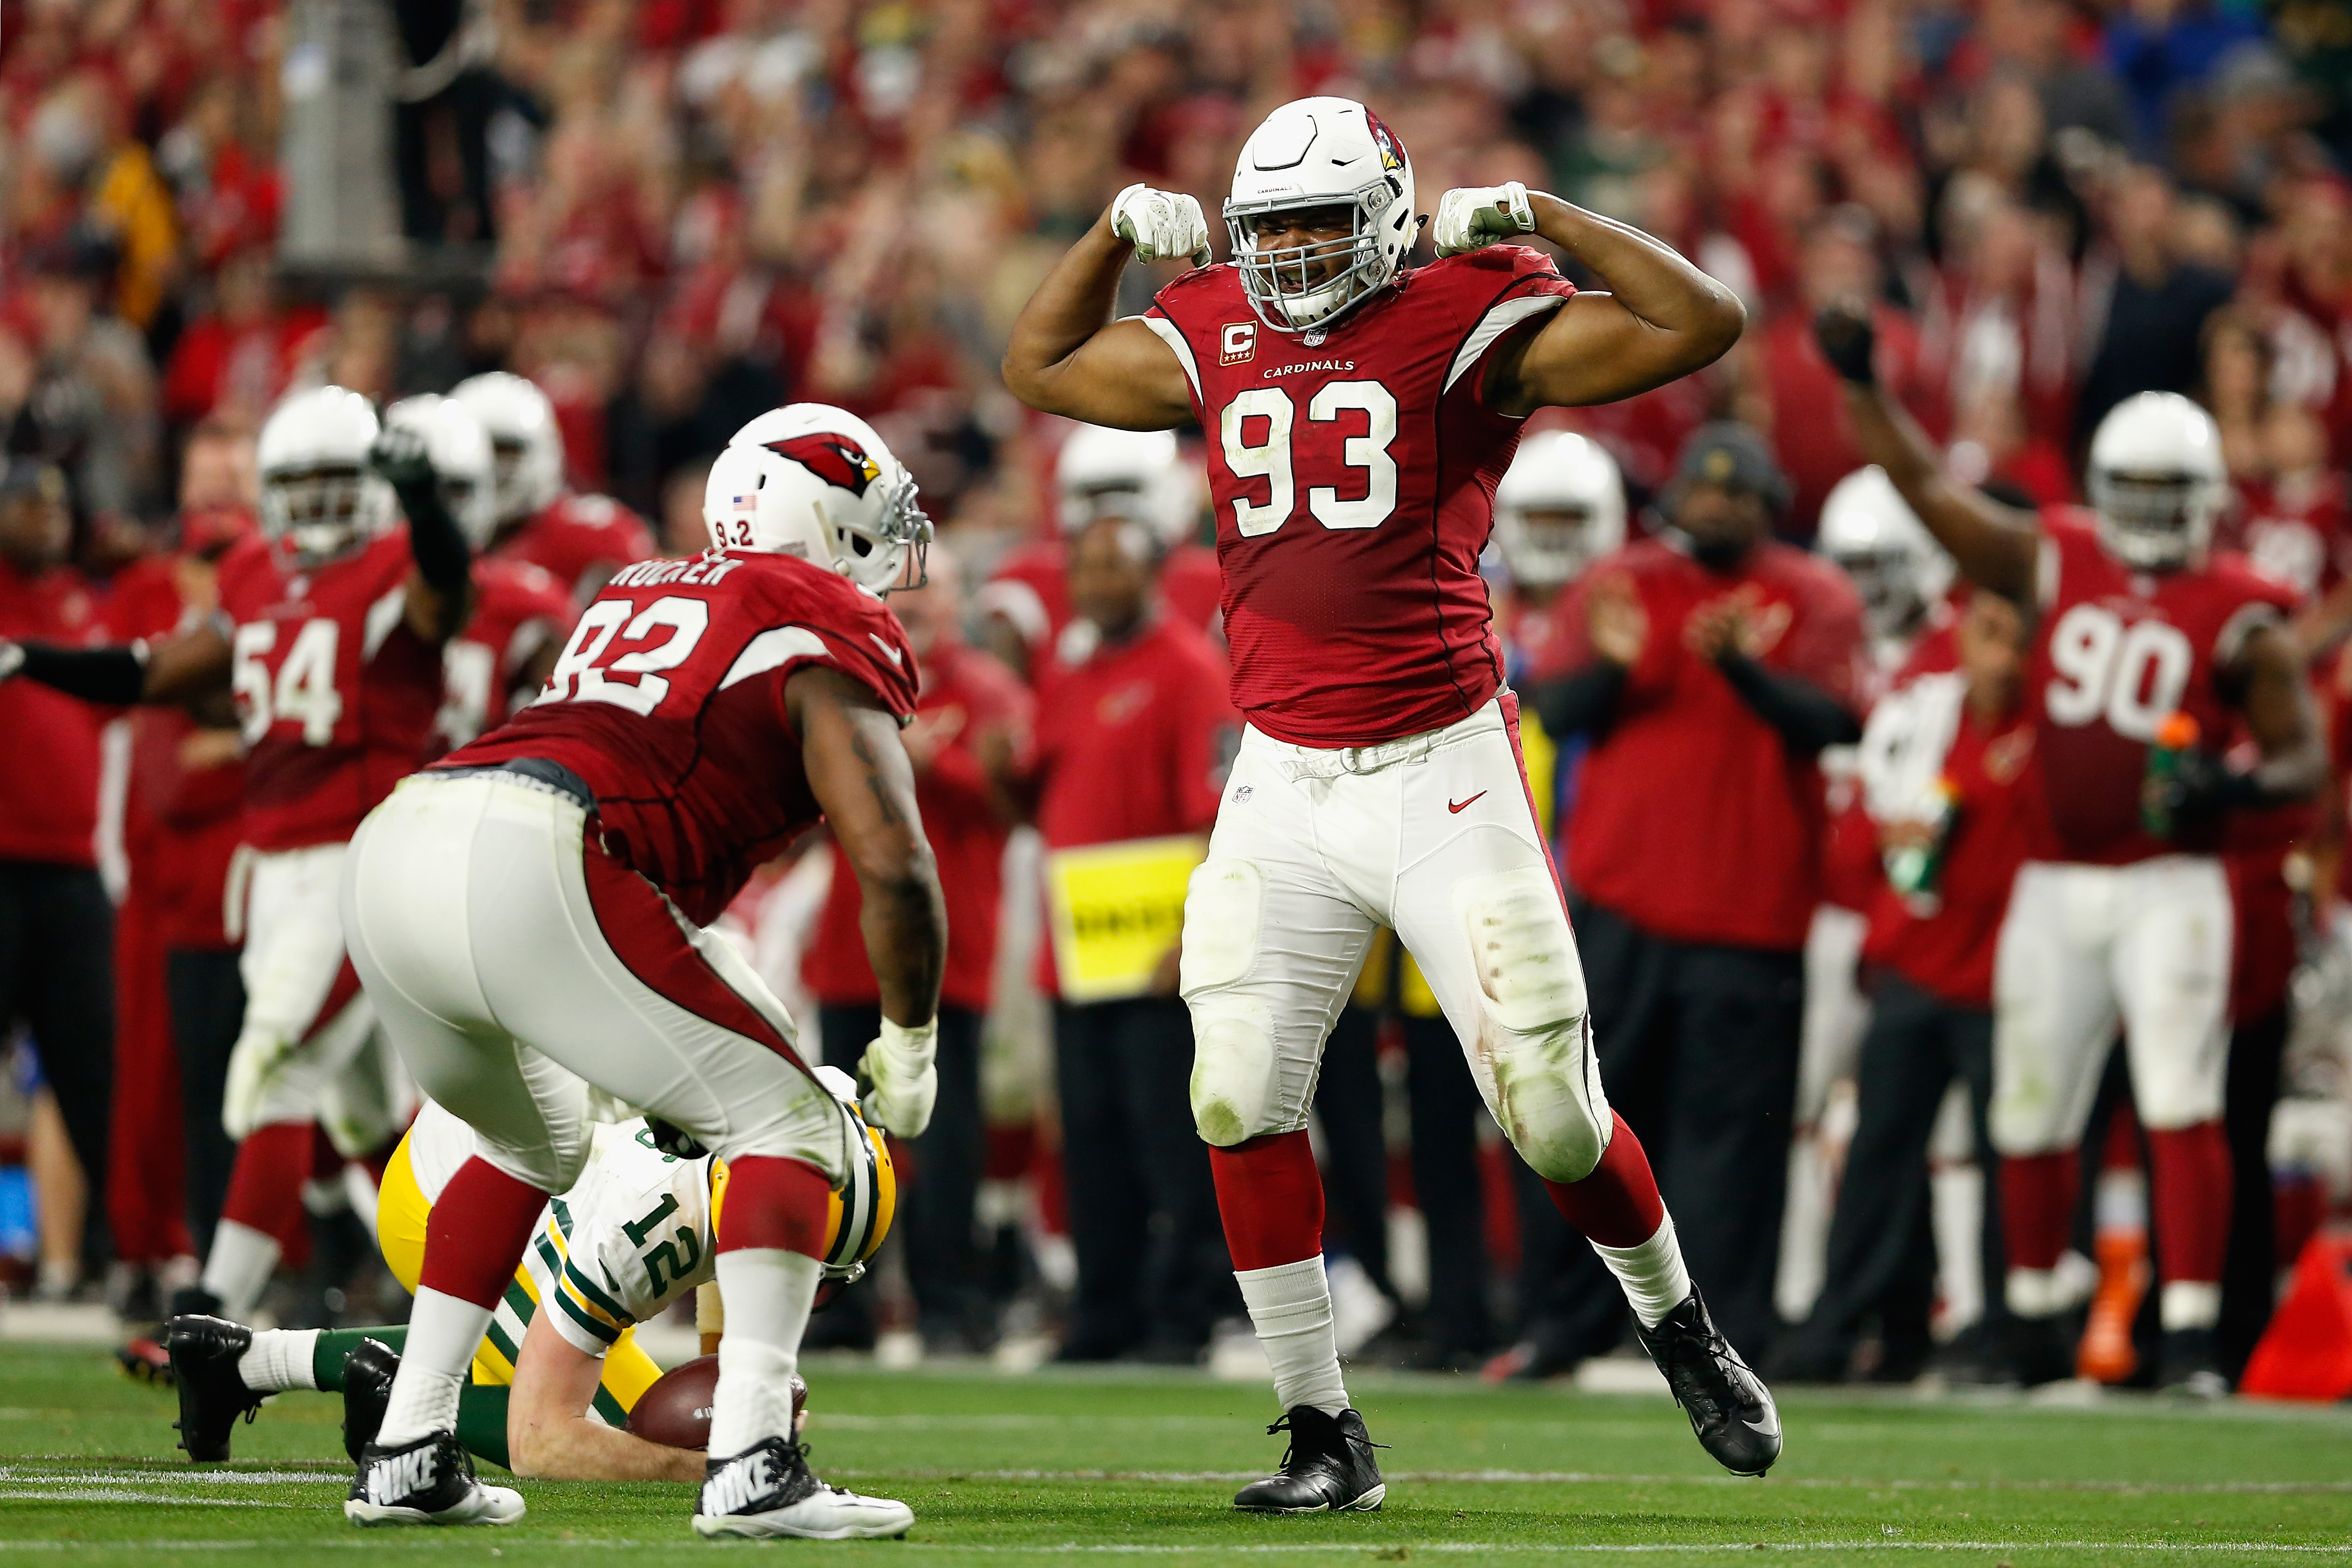 Cardinals Playoff Schedule Opponent, Date, Time, TV Info